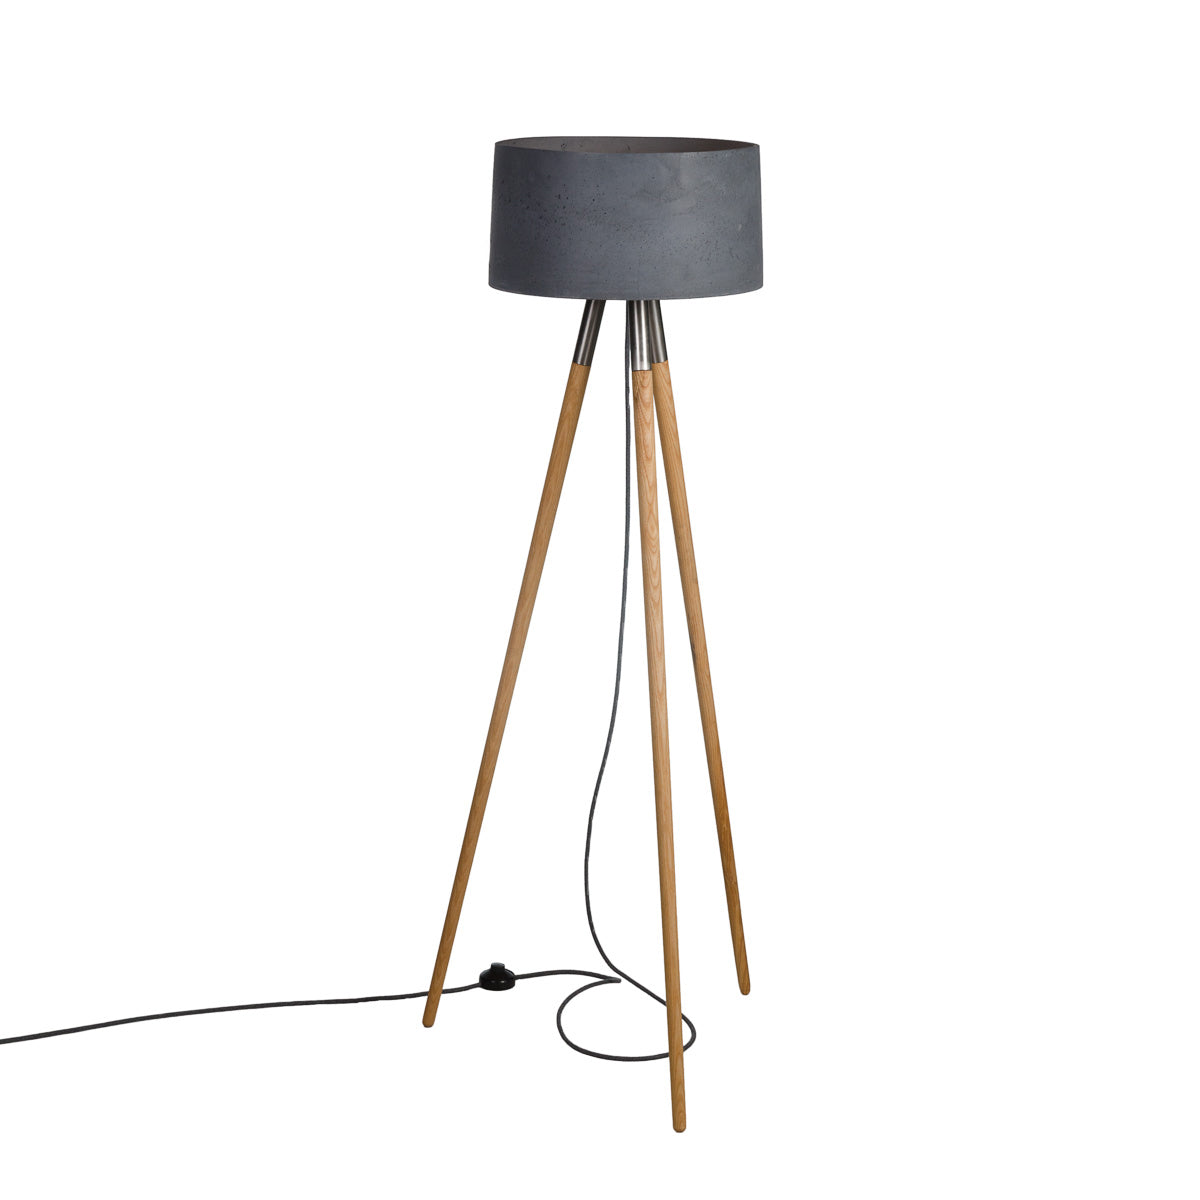 Every admirer of loft interiors and Lodge, which needs additional lighting, will like the Malta Floor floor lamp. The original, hand -made design with a poured, concrete lampshade is one of a kind. The metal element that connects the upper part with wooden legs, has a decorative function, which can only be seen at the shade itself. It has a decorative function.